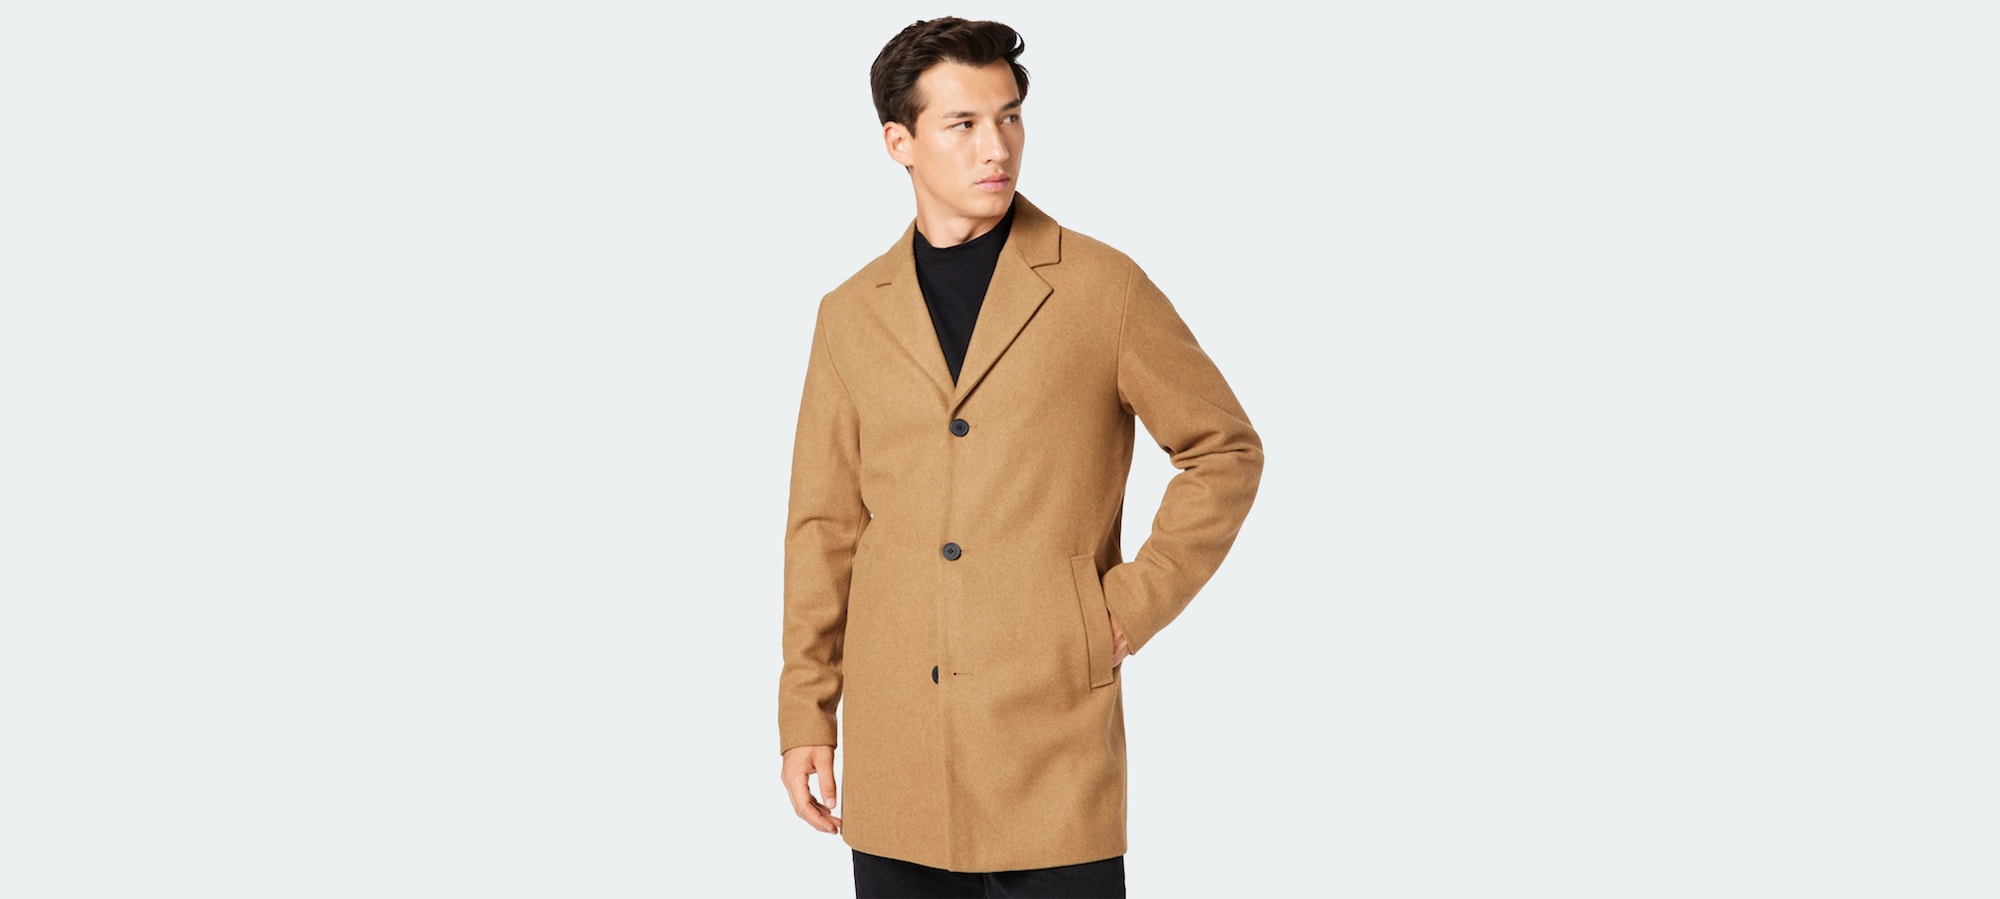 Save now! Coats